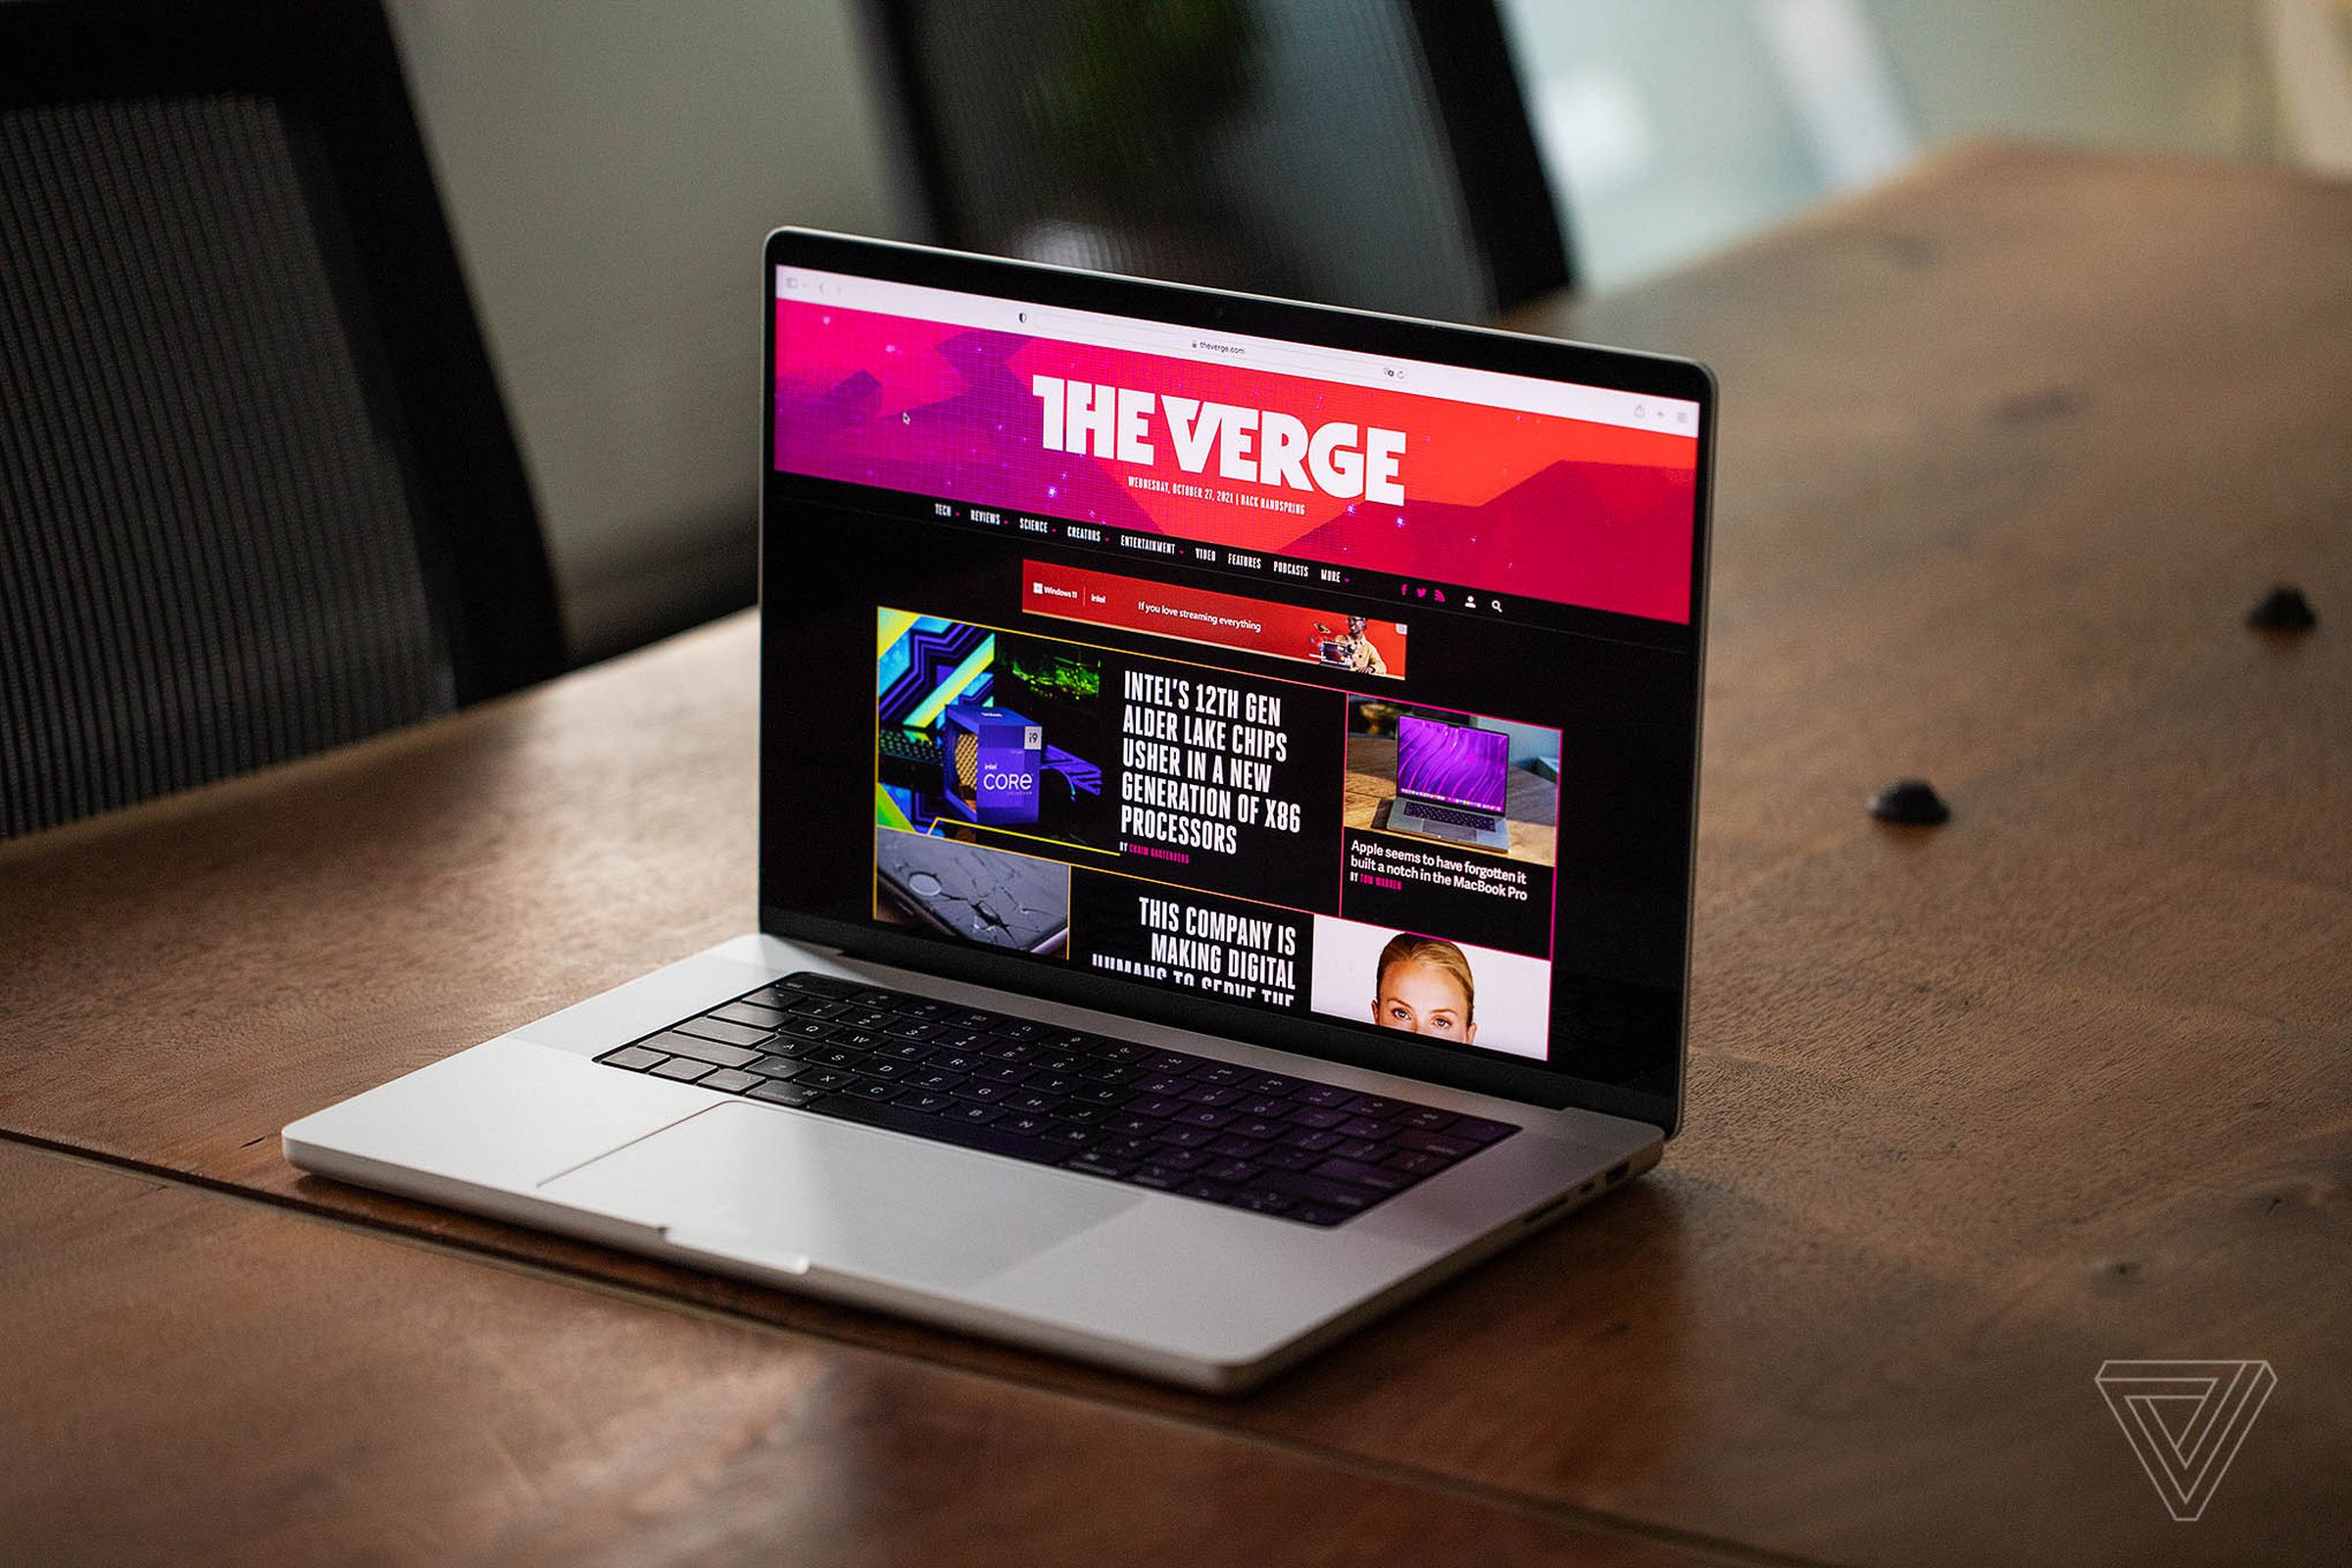 Apple’s 2021 14-inch MacBook Pro is opened on a wooden table. Its display is showing off The Verge’s homepage.